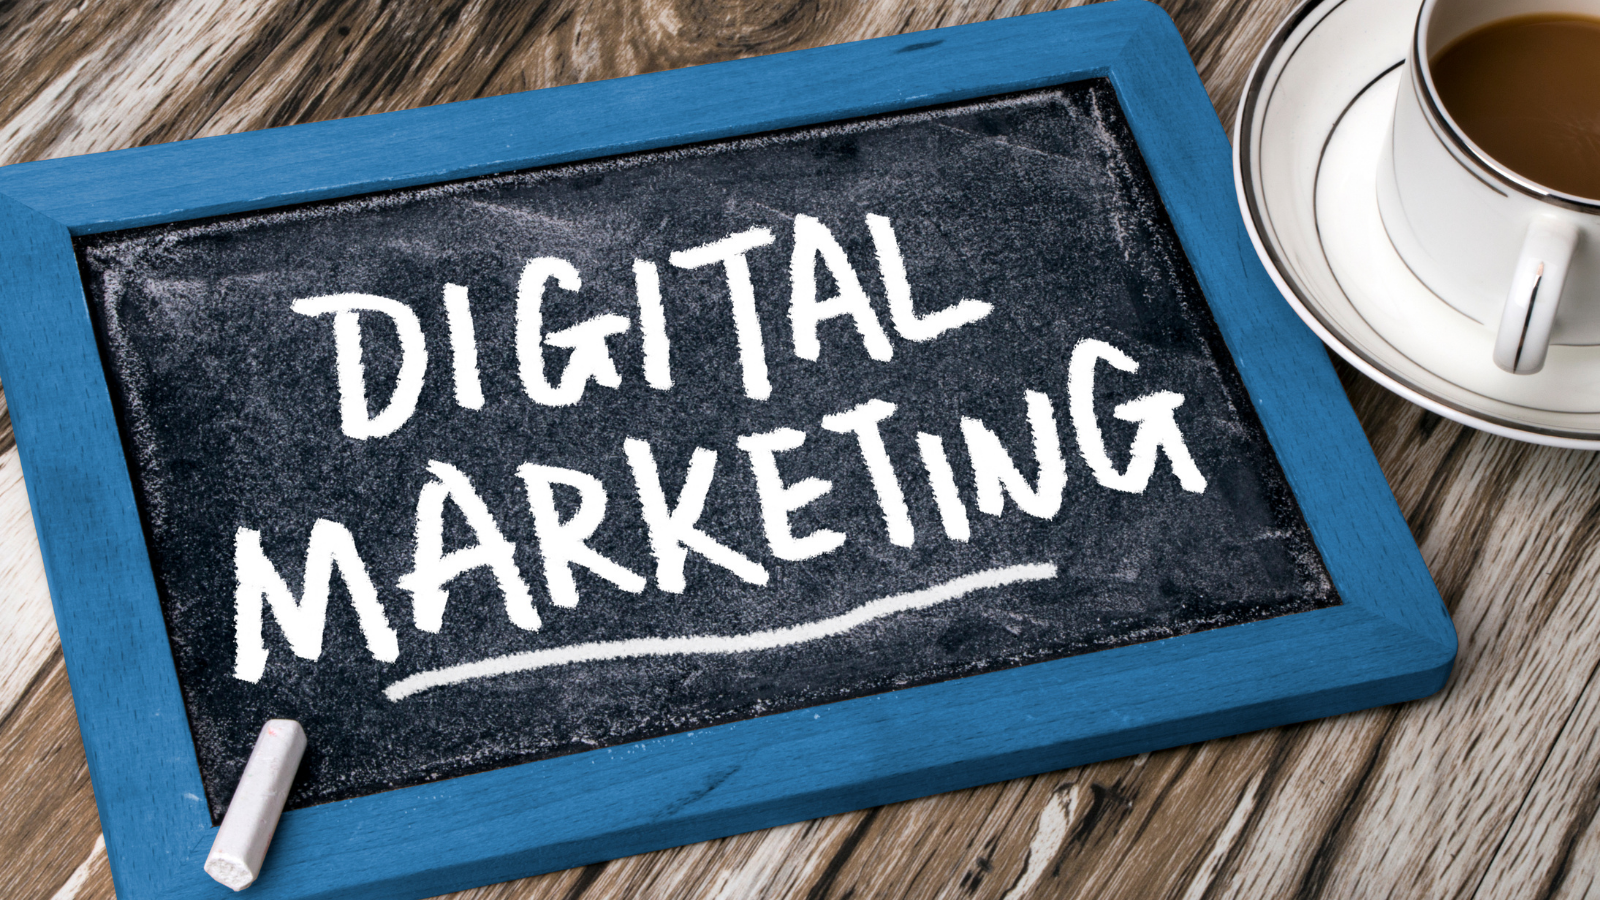 3 Digital Marketing Tips for Small Businesses in 2022